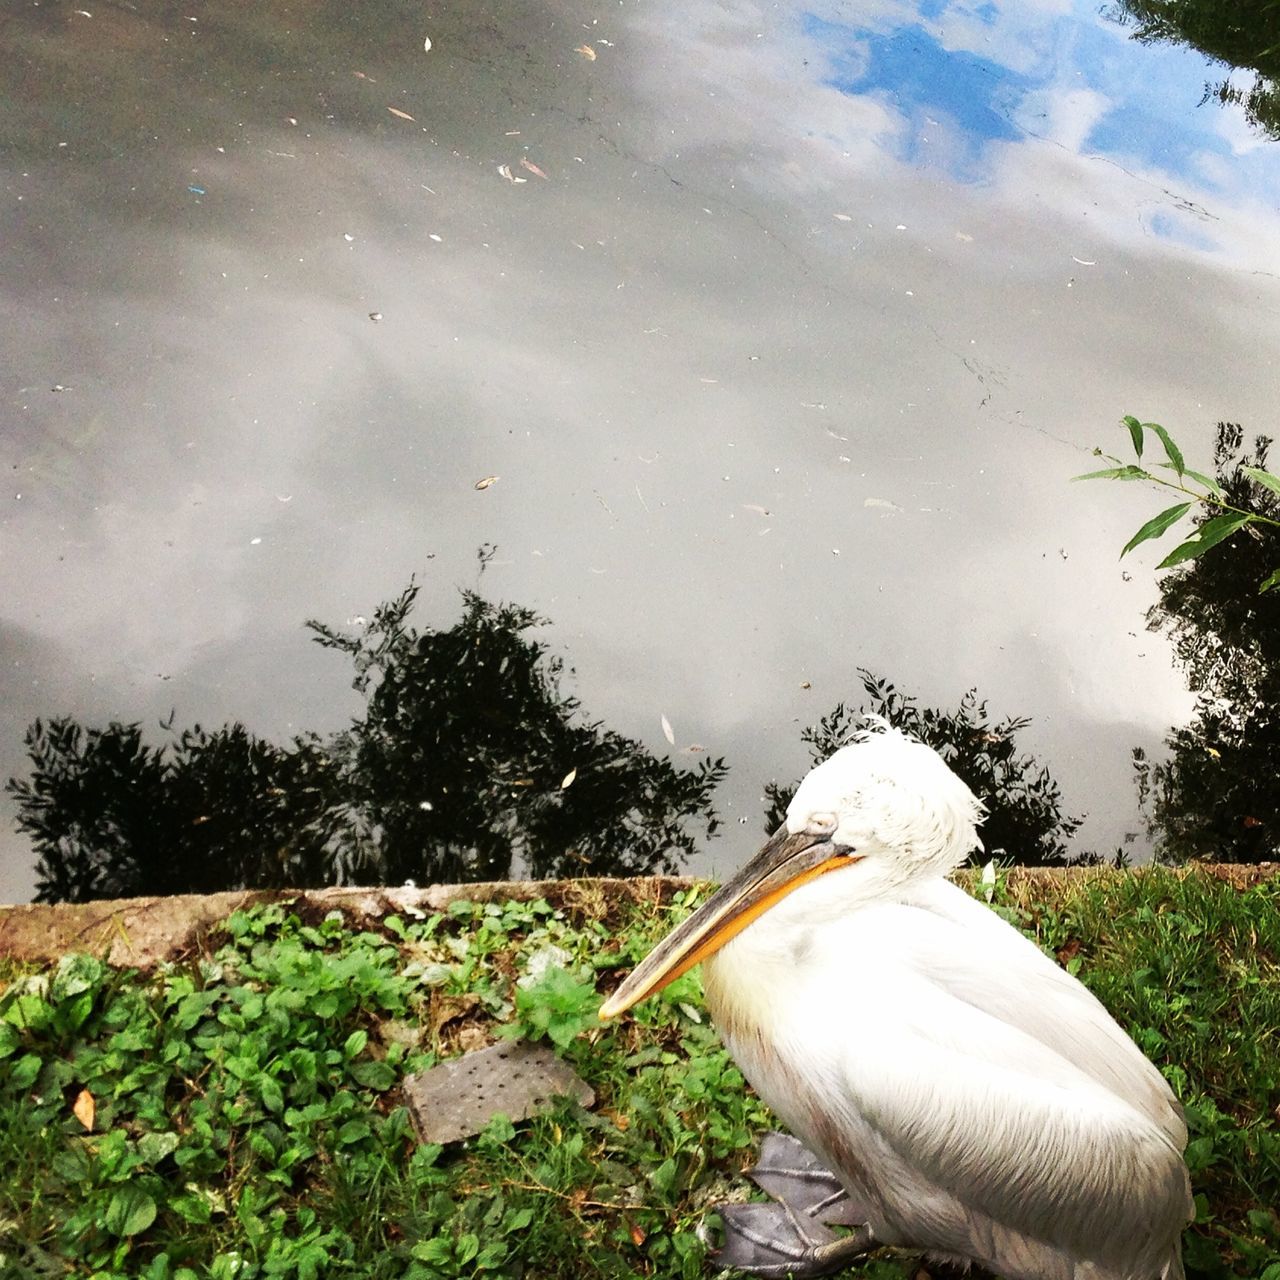 water, bird, tree, animal themes, animals in the wild, lake, wildlife, nature, sky, swan, outdoors, pond, day, no people, grass, reflection, beauty in nature, field, growth, close-up